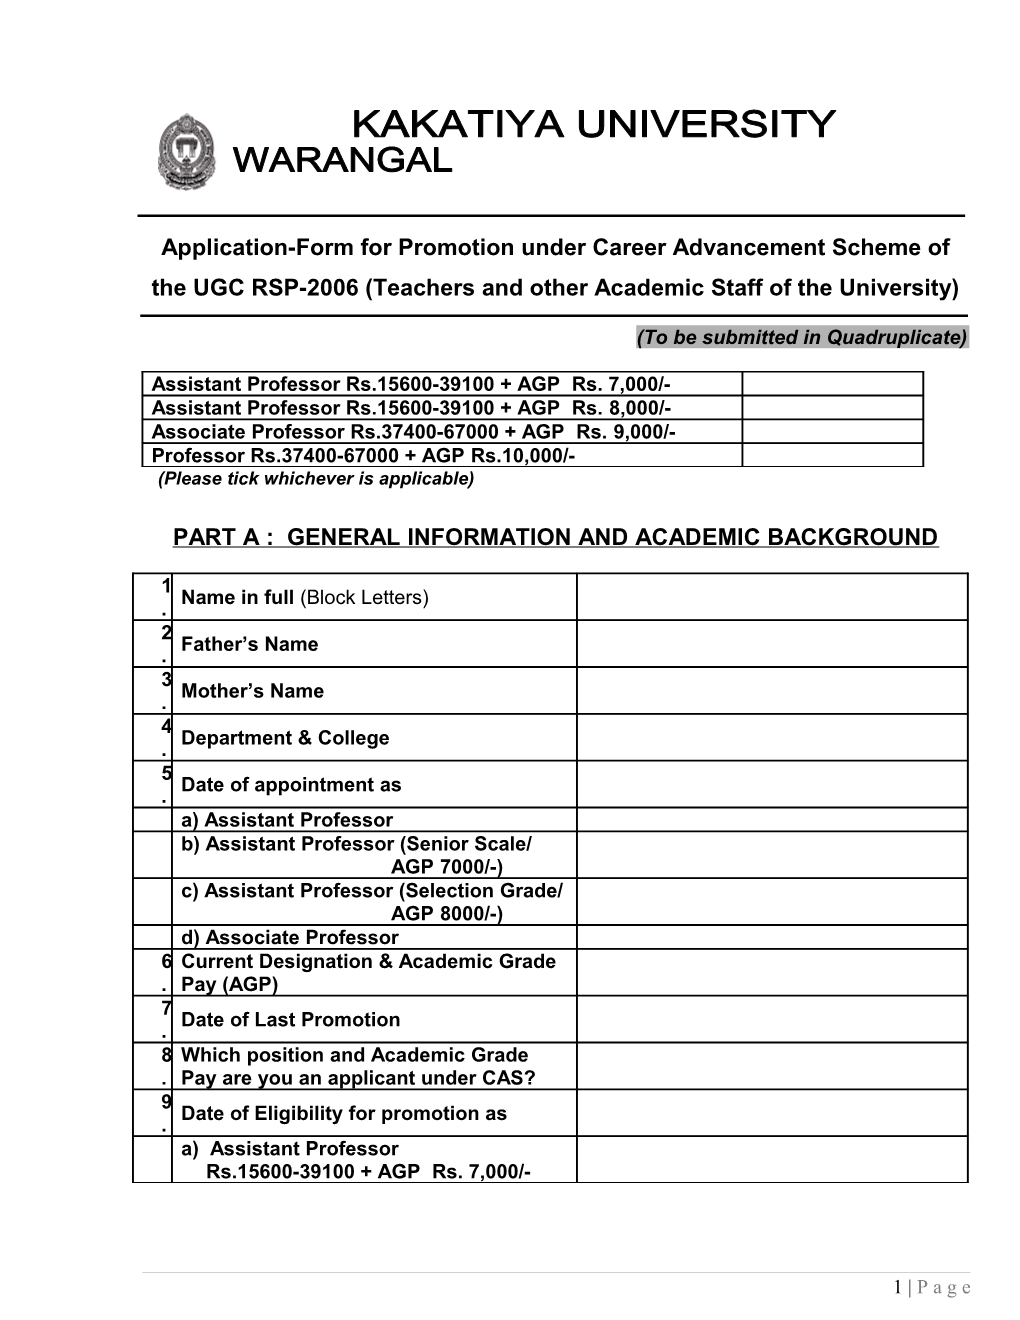 Part a : General Information and Academic Background